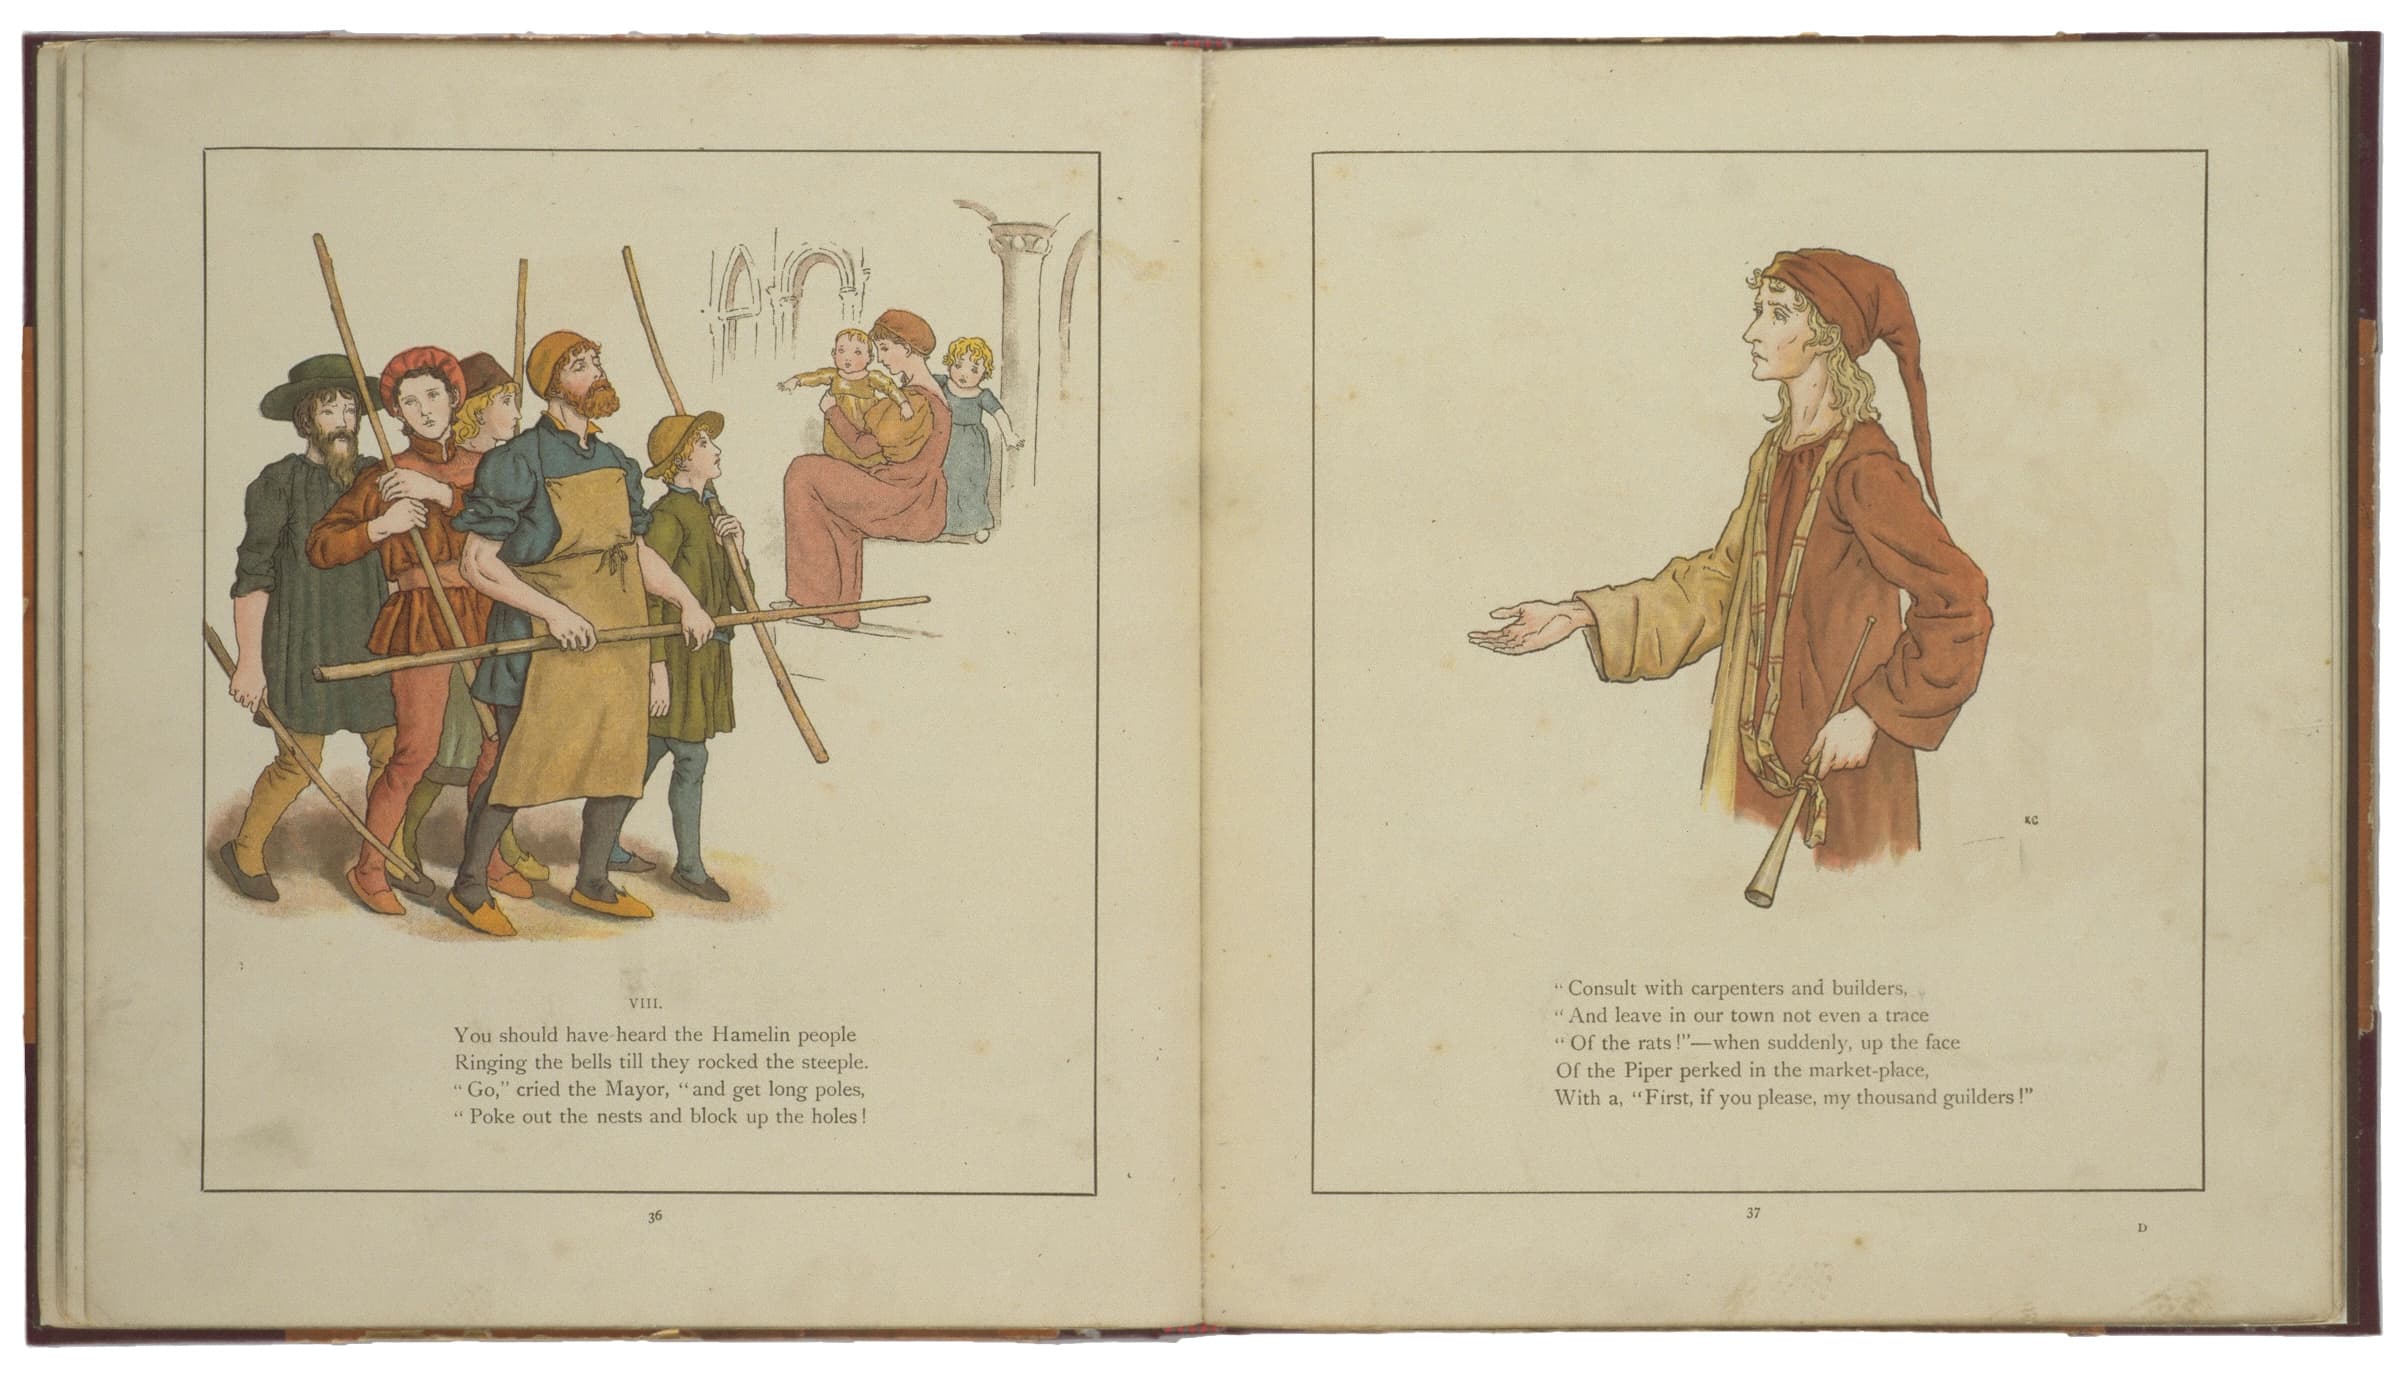 page 36-37 of The Pied Piper of Hamelin